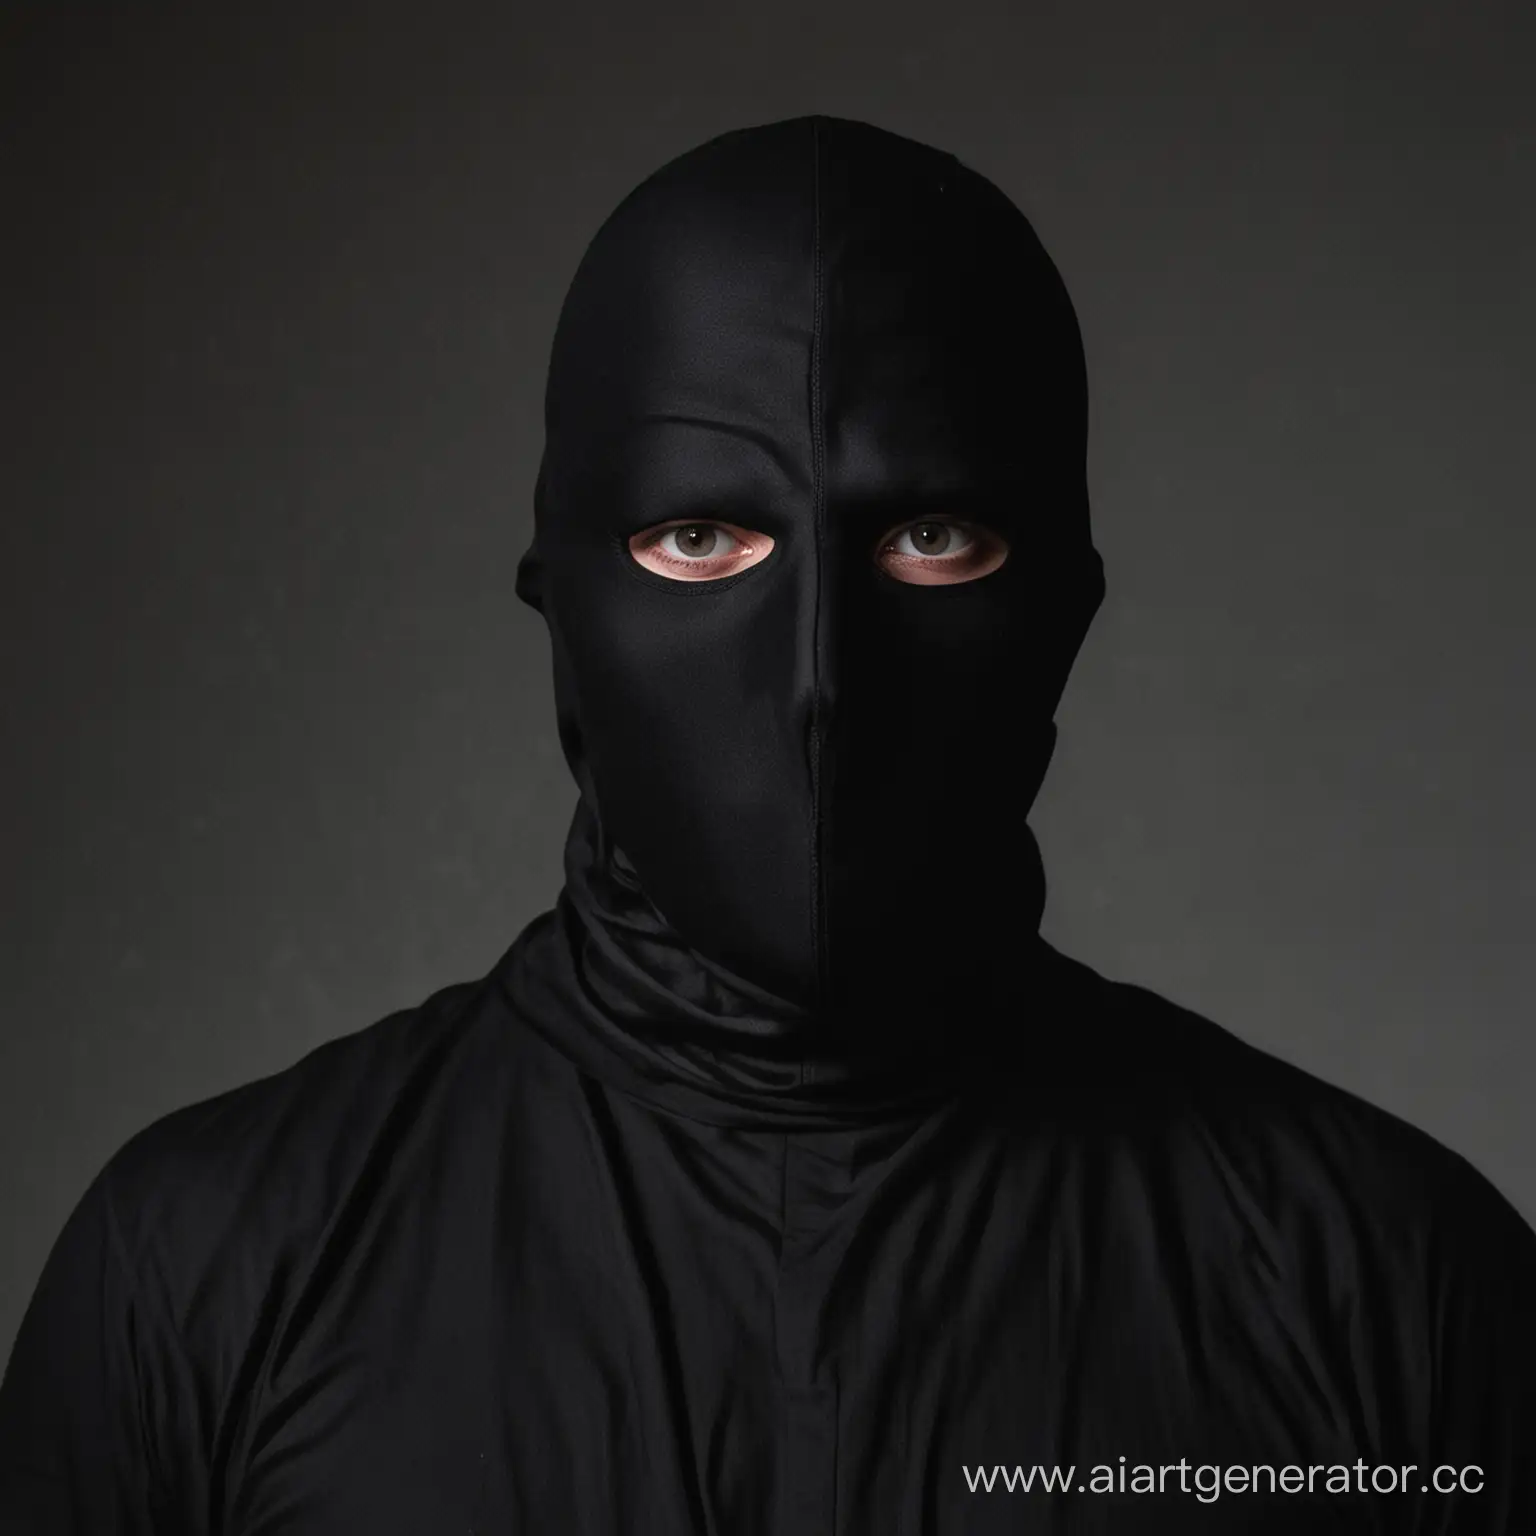 Mysterious-Figure-in-Black-Mask-with-Concealed-Identity